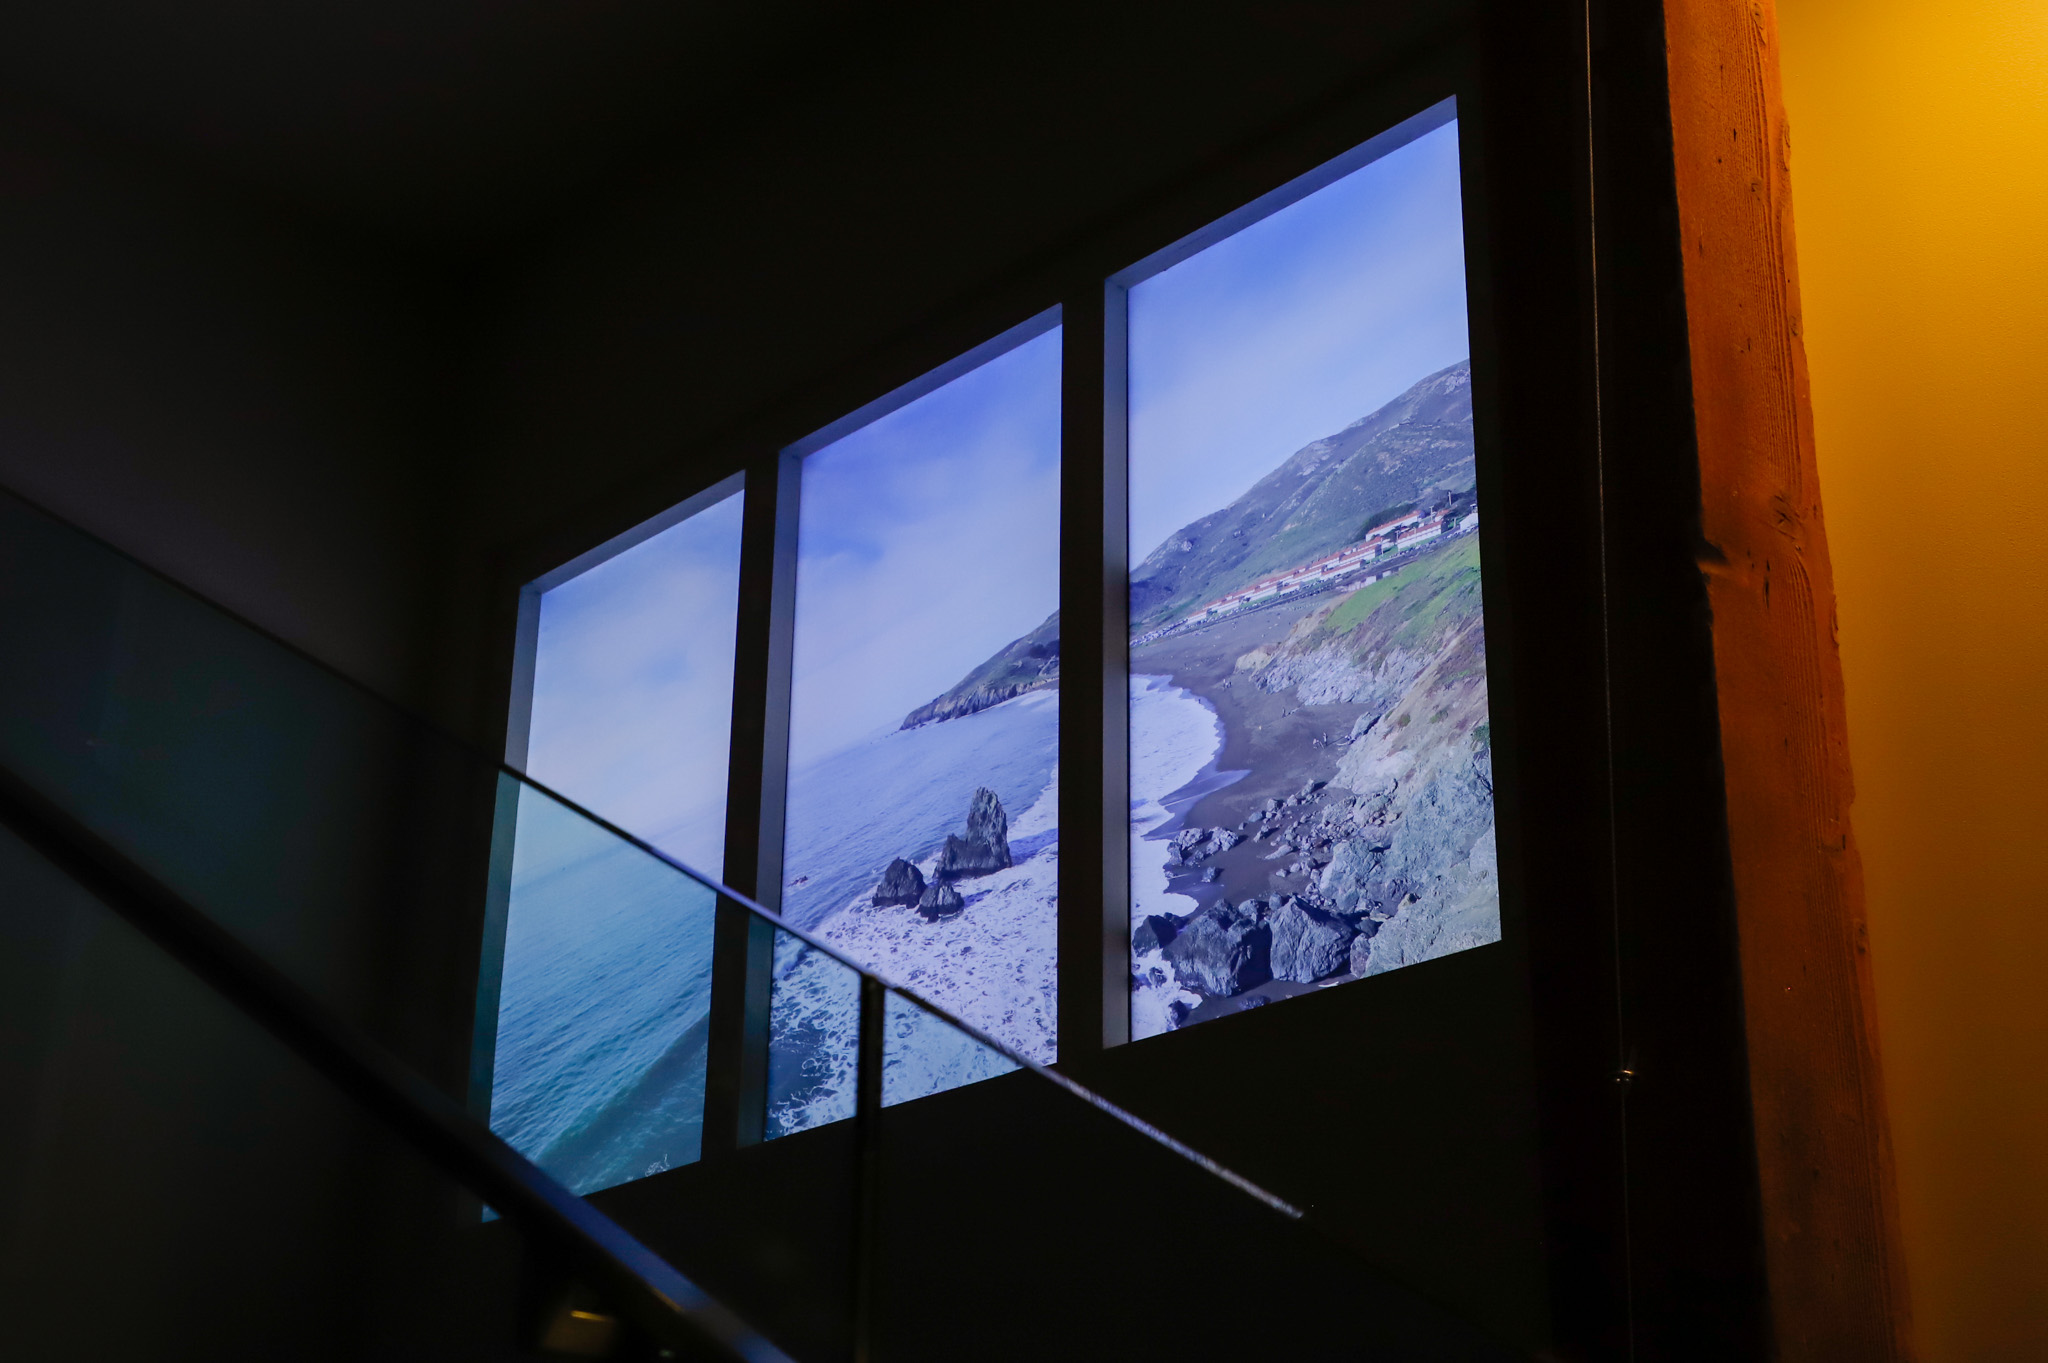 A Million-Dollar View Can Be Yours for $60,000, Thanks to This New Technology